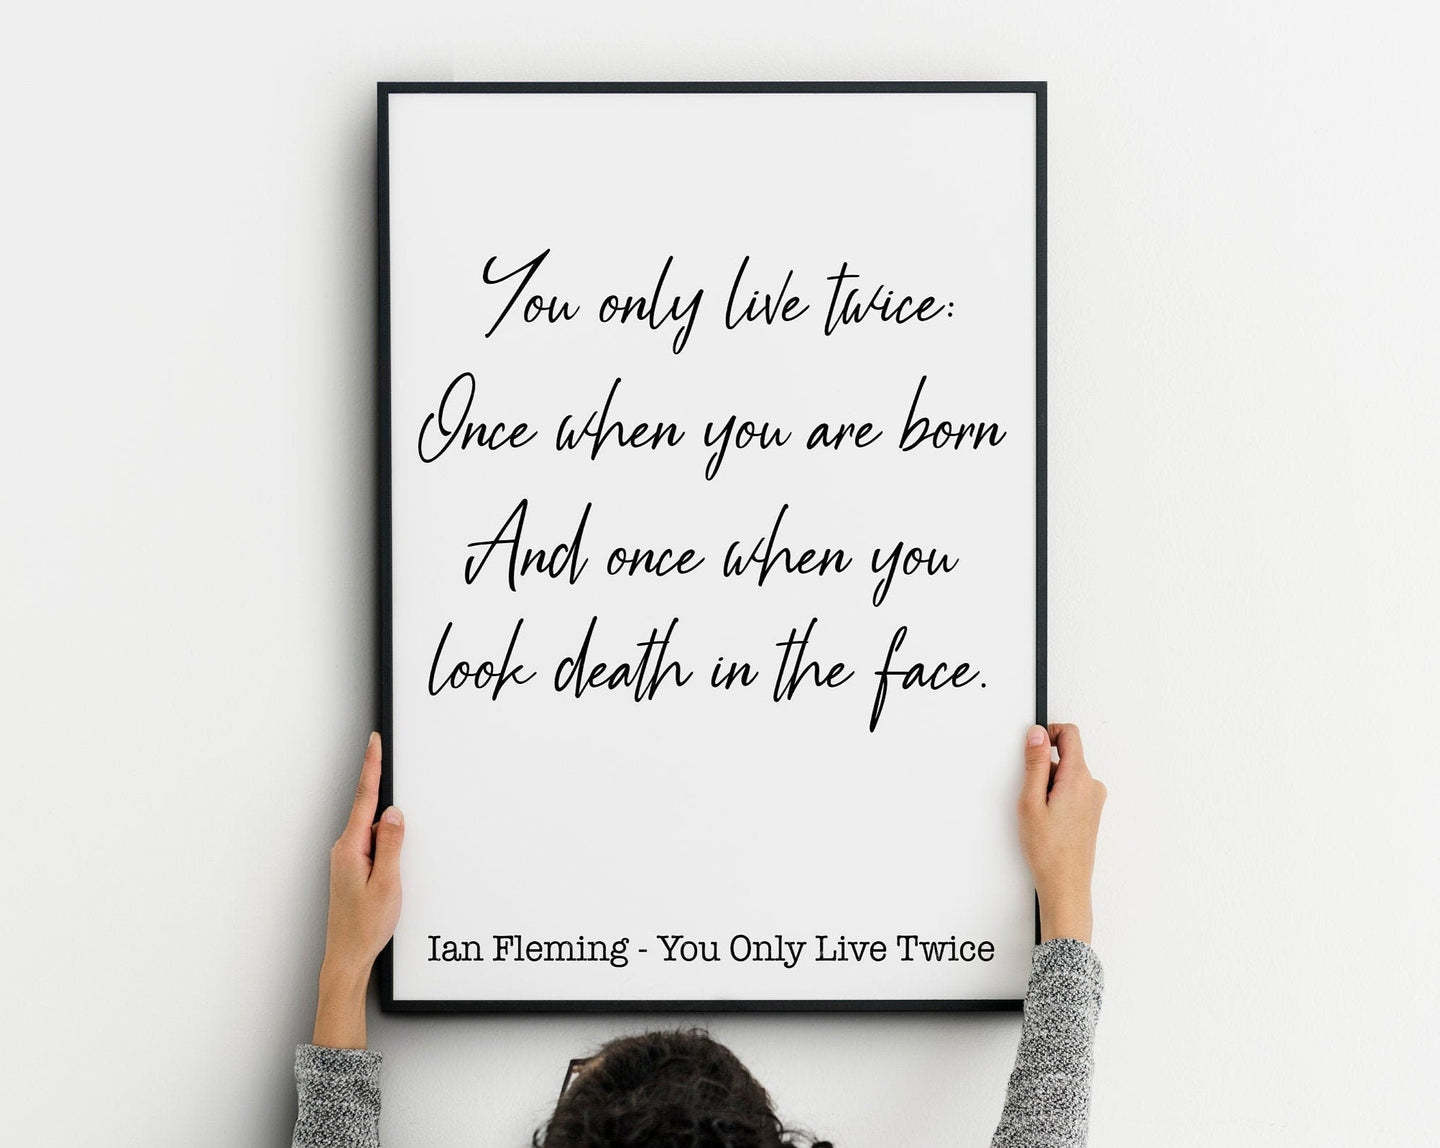 James Bond - Ian Fleming book quote - You only live twice - book quote print  - Print for wall decor home library decor UNFRAMED